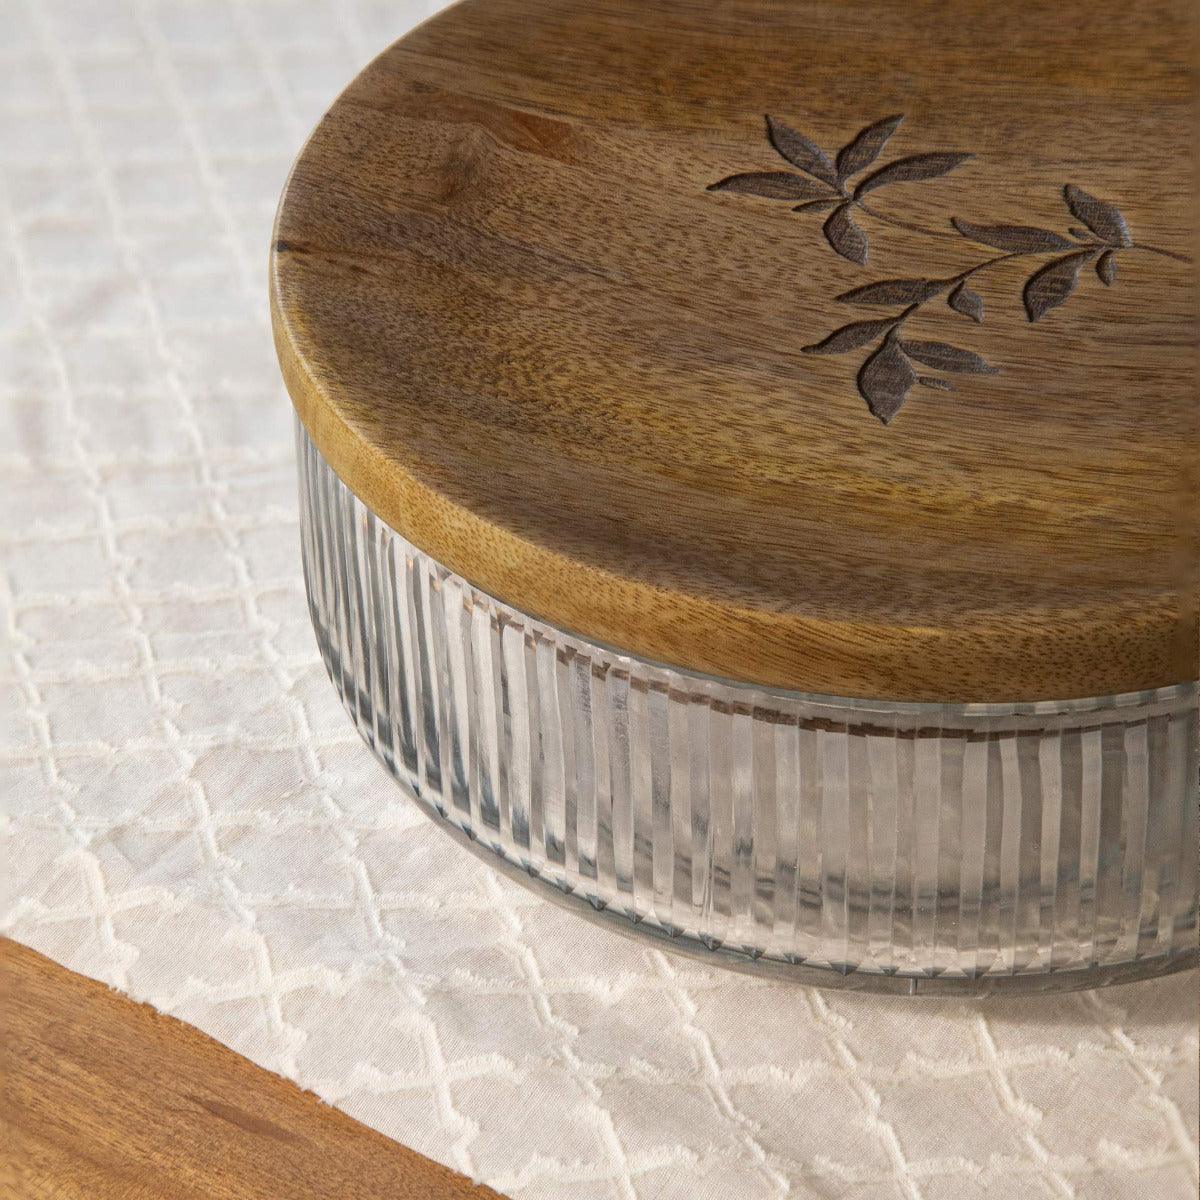 Meissa glass roti box with wooden lid